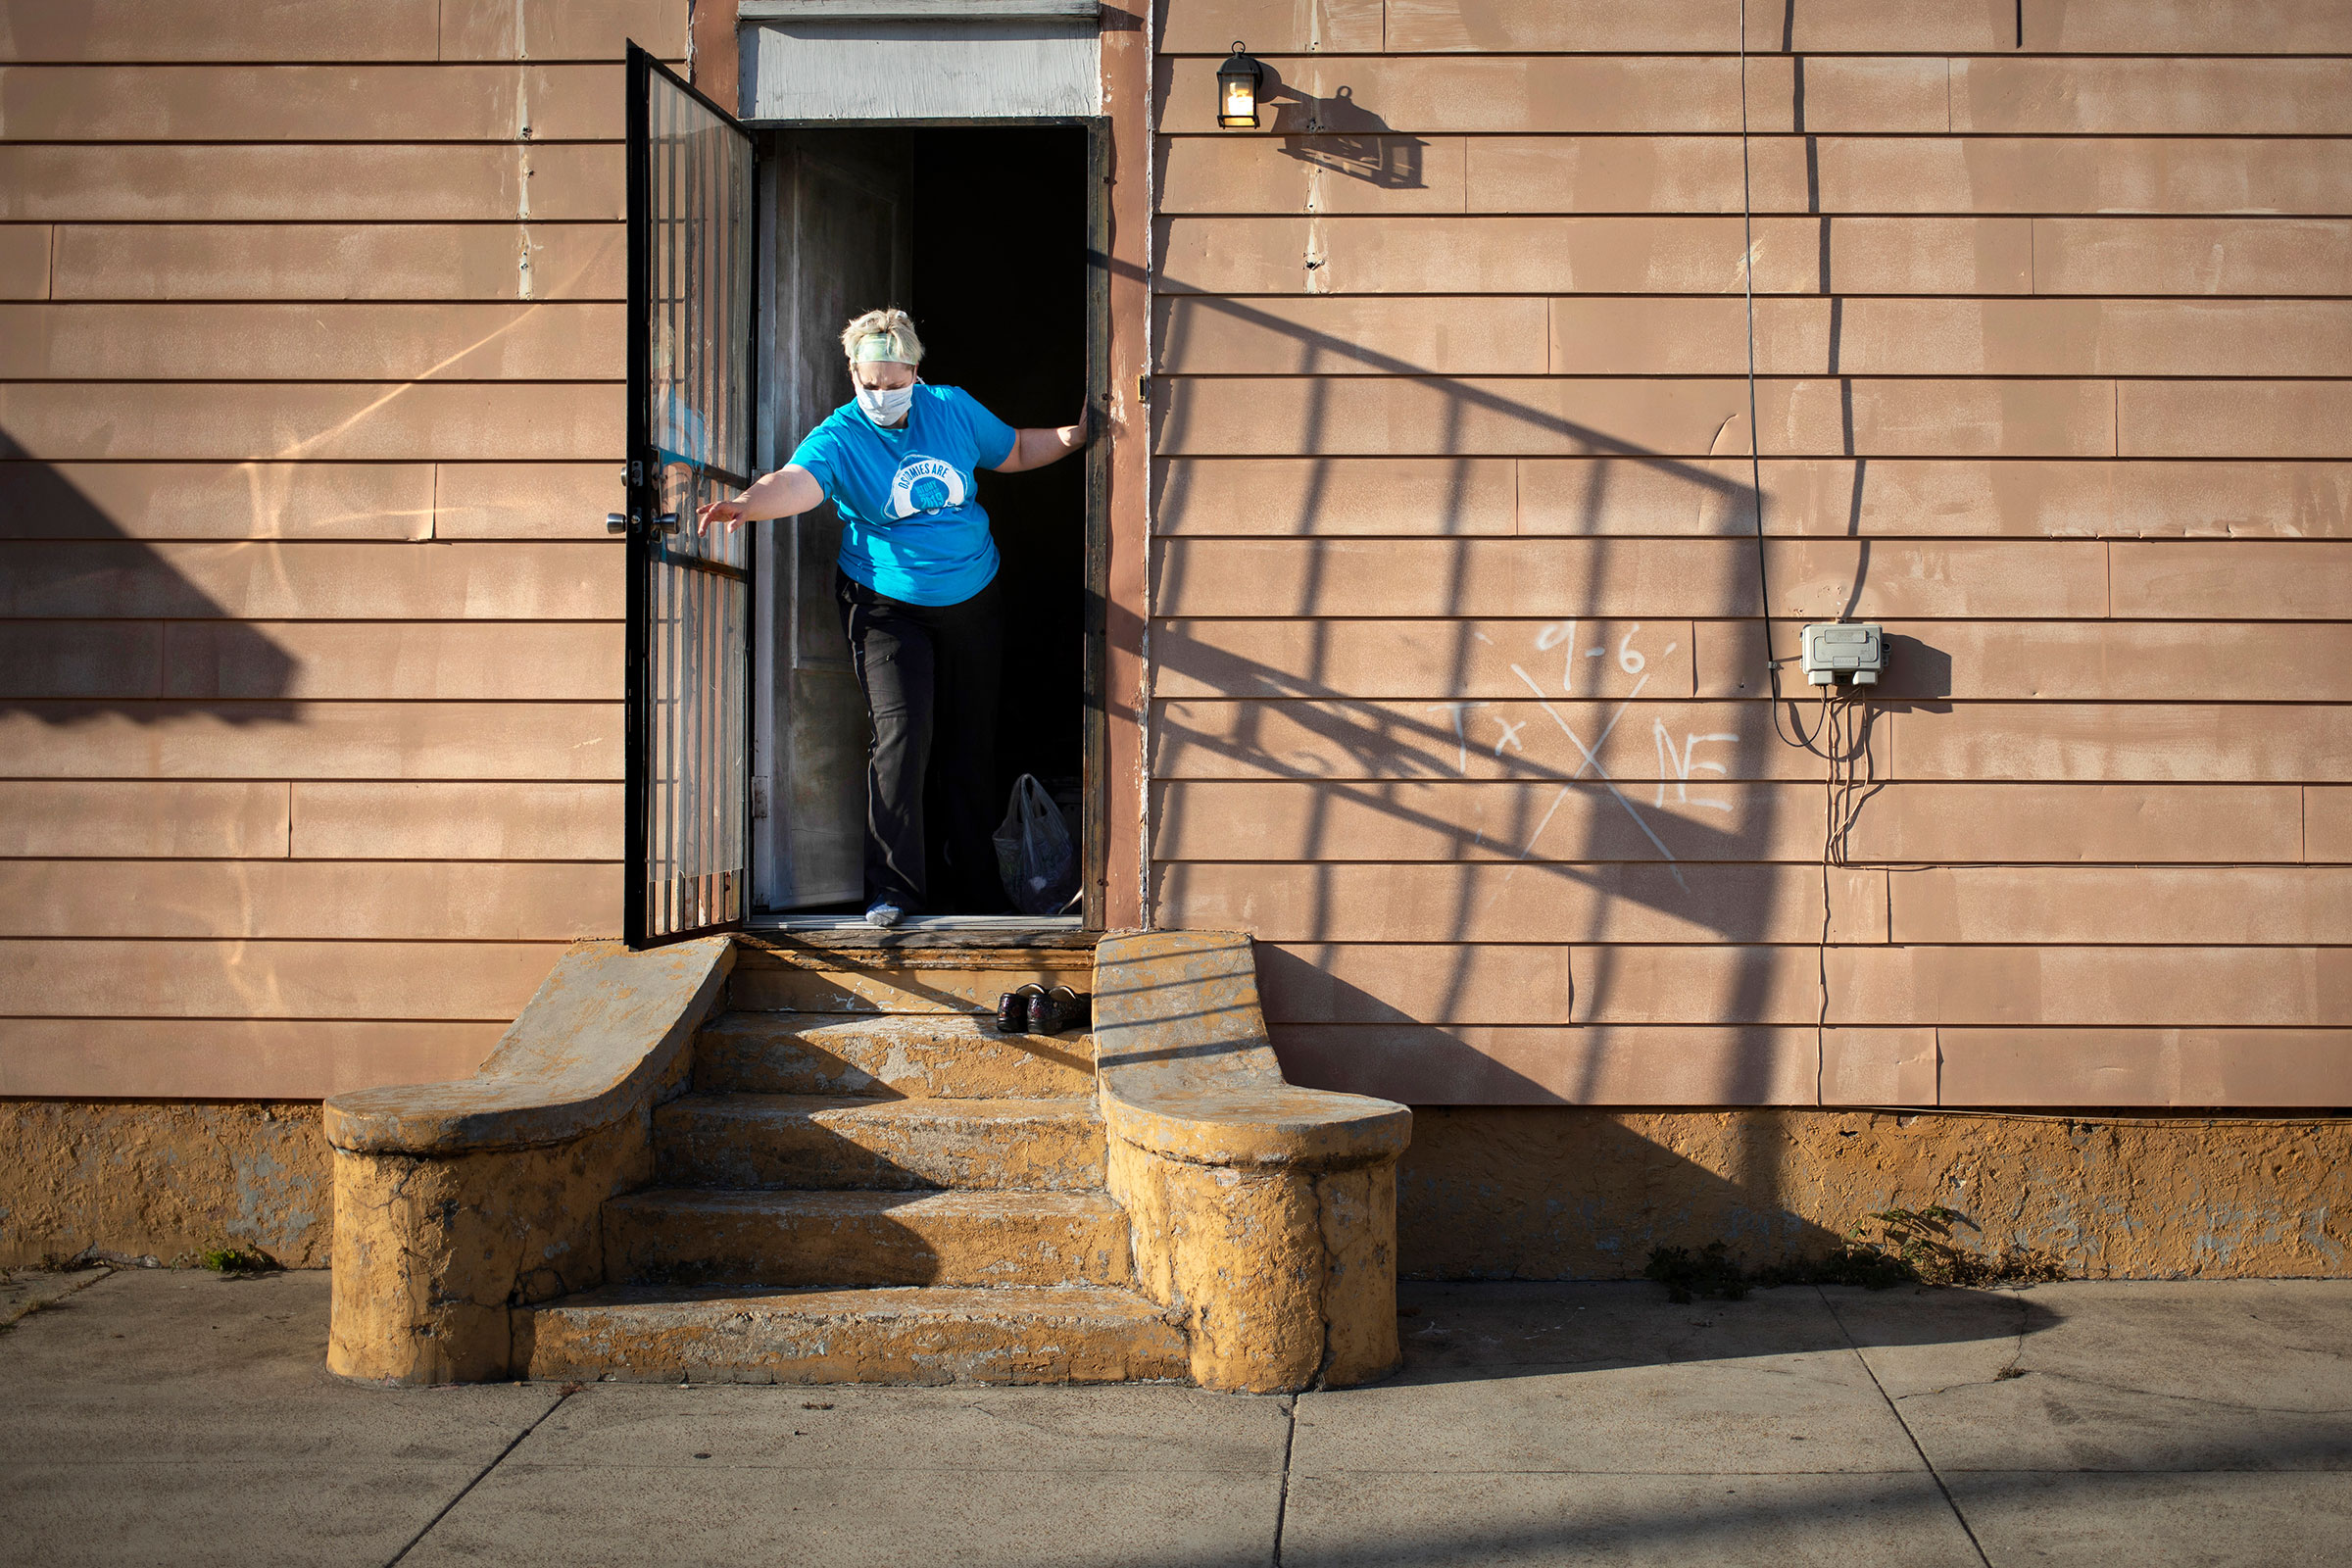 Laurie Halbrook leaves her shoes outside and closes the side door at her house after a shift working as a nurse on April 3, 2020. (Kathleen Flynn for TIME)